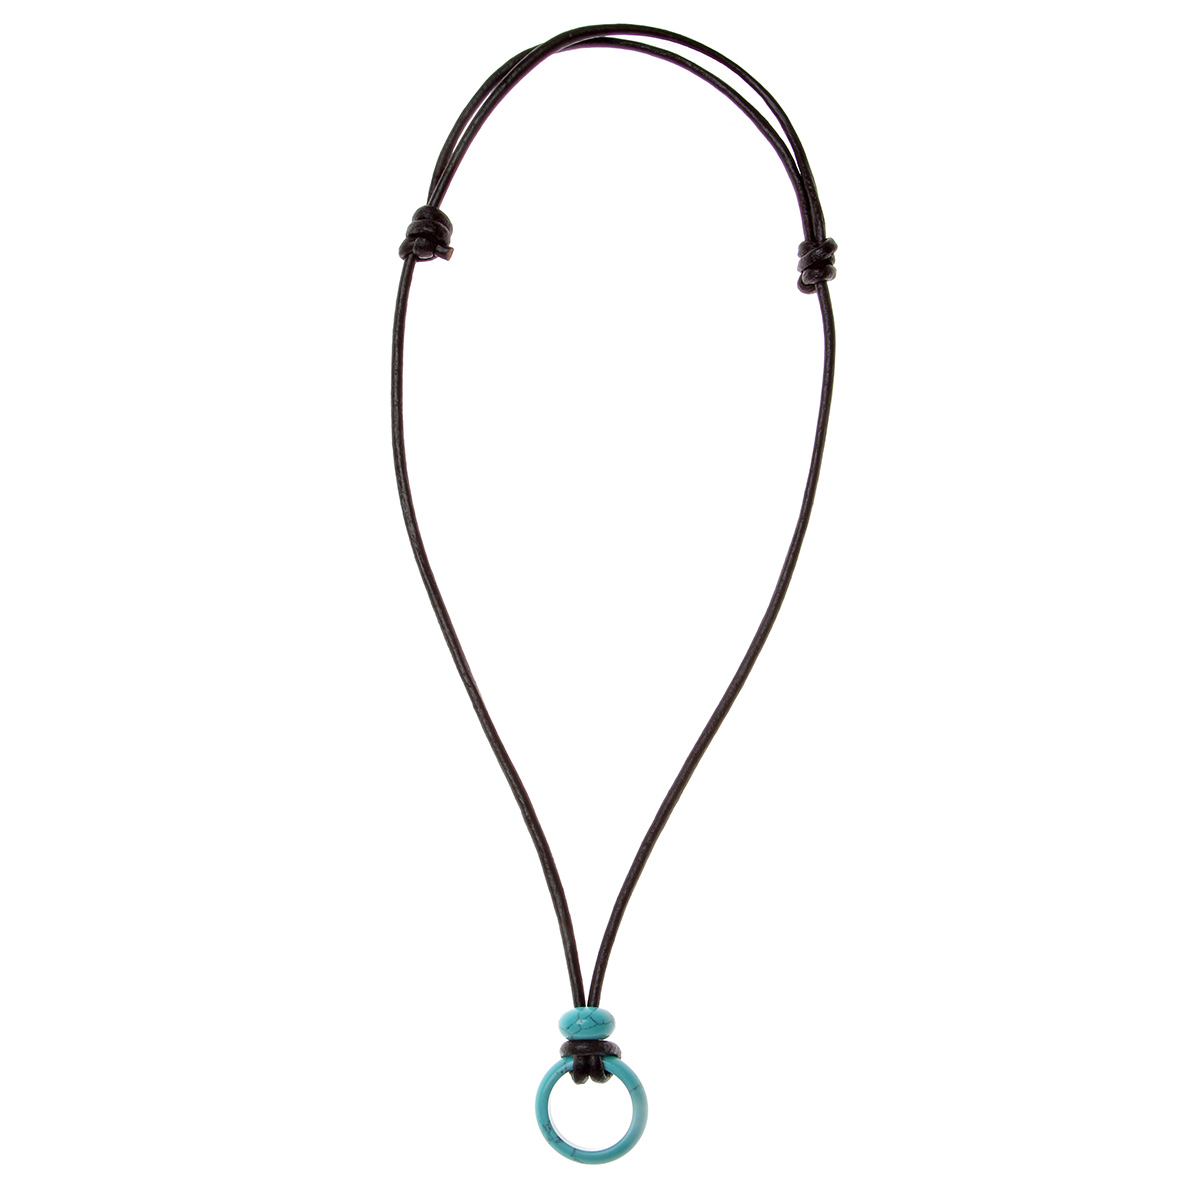 Necklace – Hanging for sunglasses - Turquoise